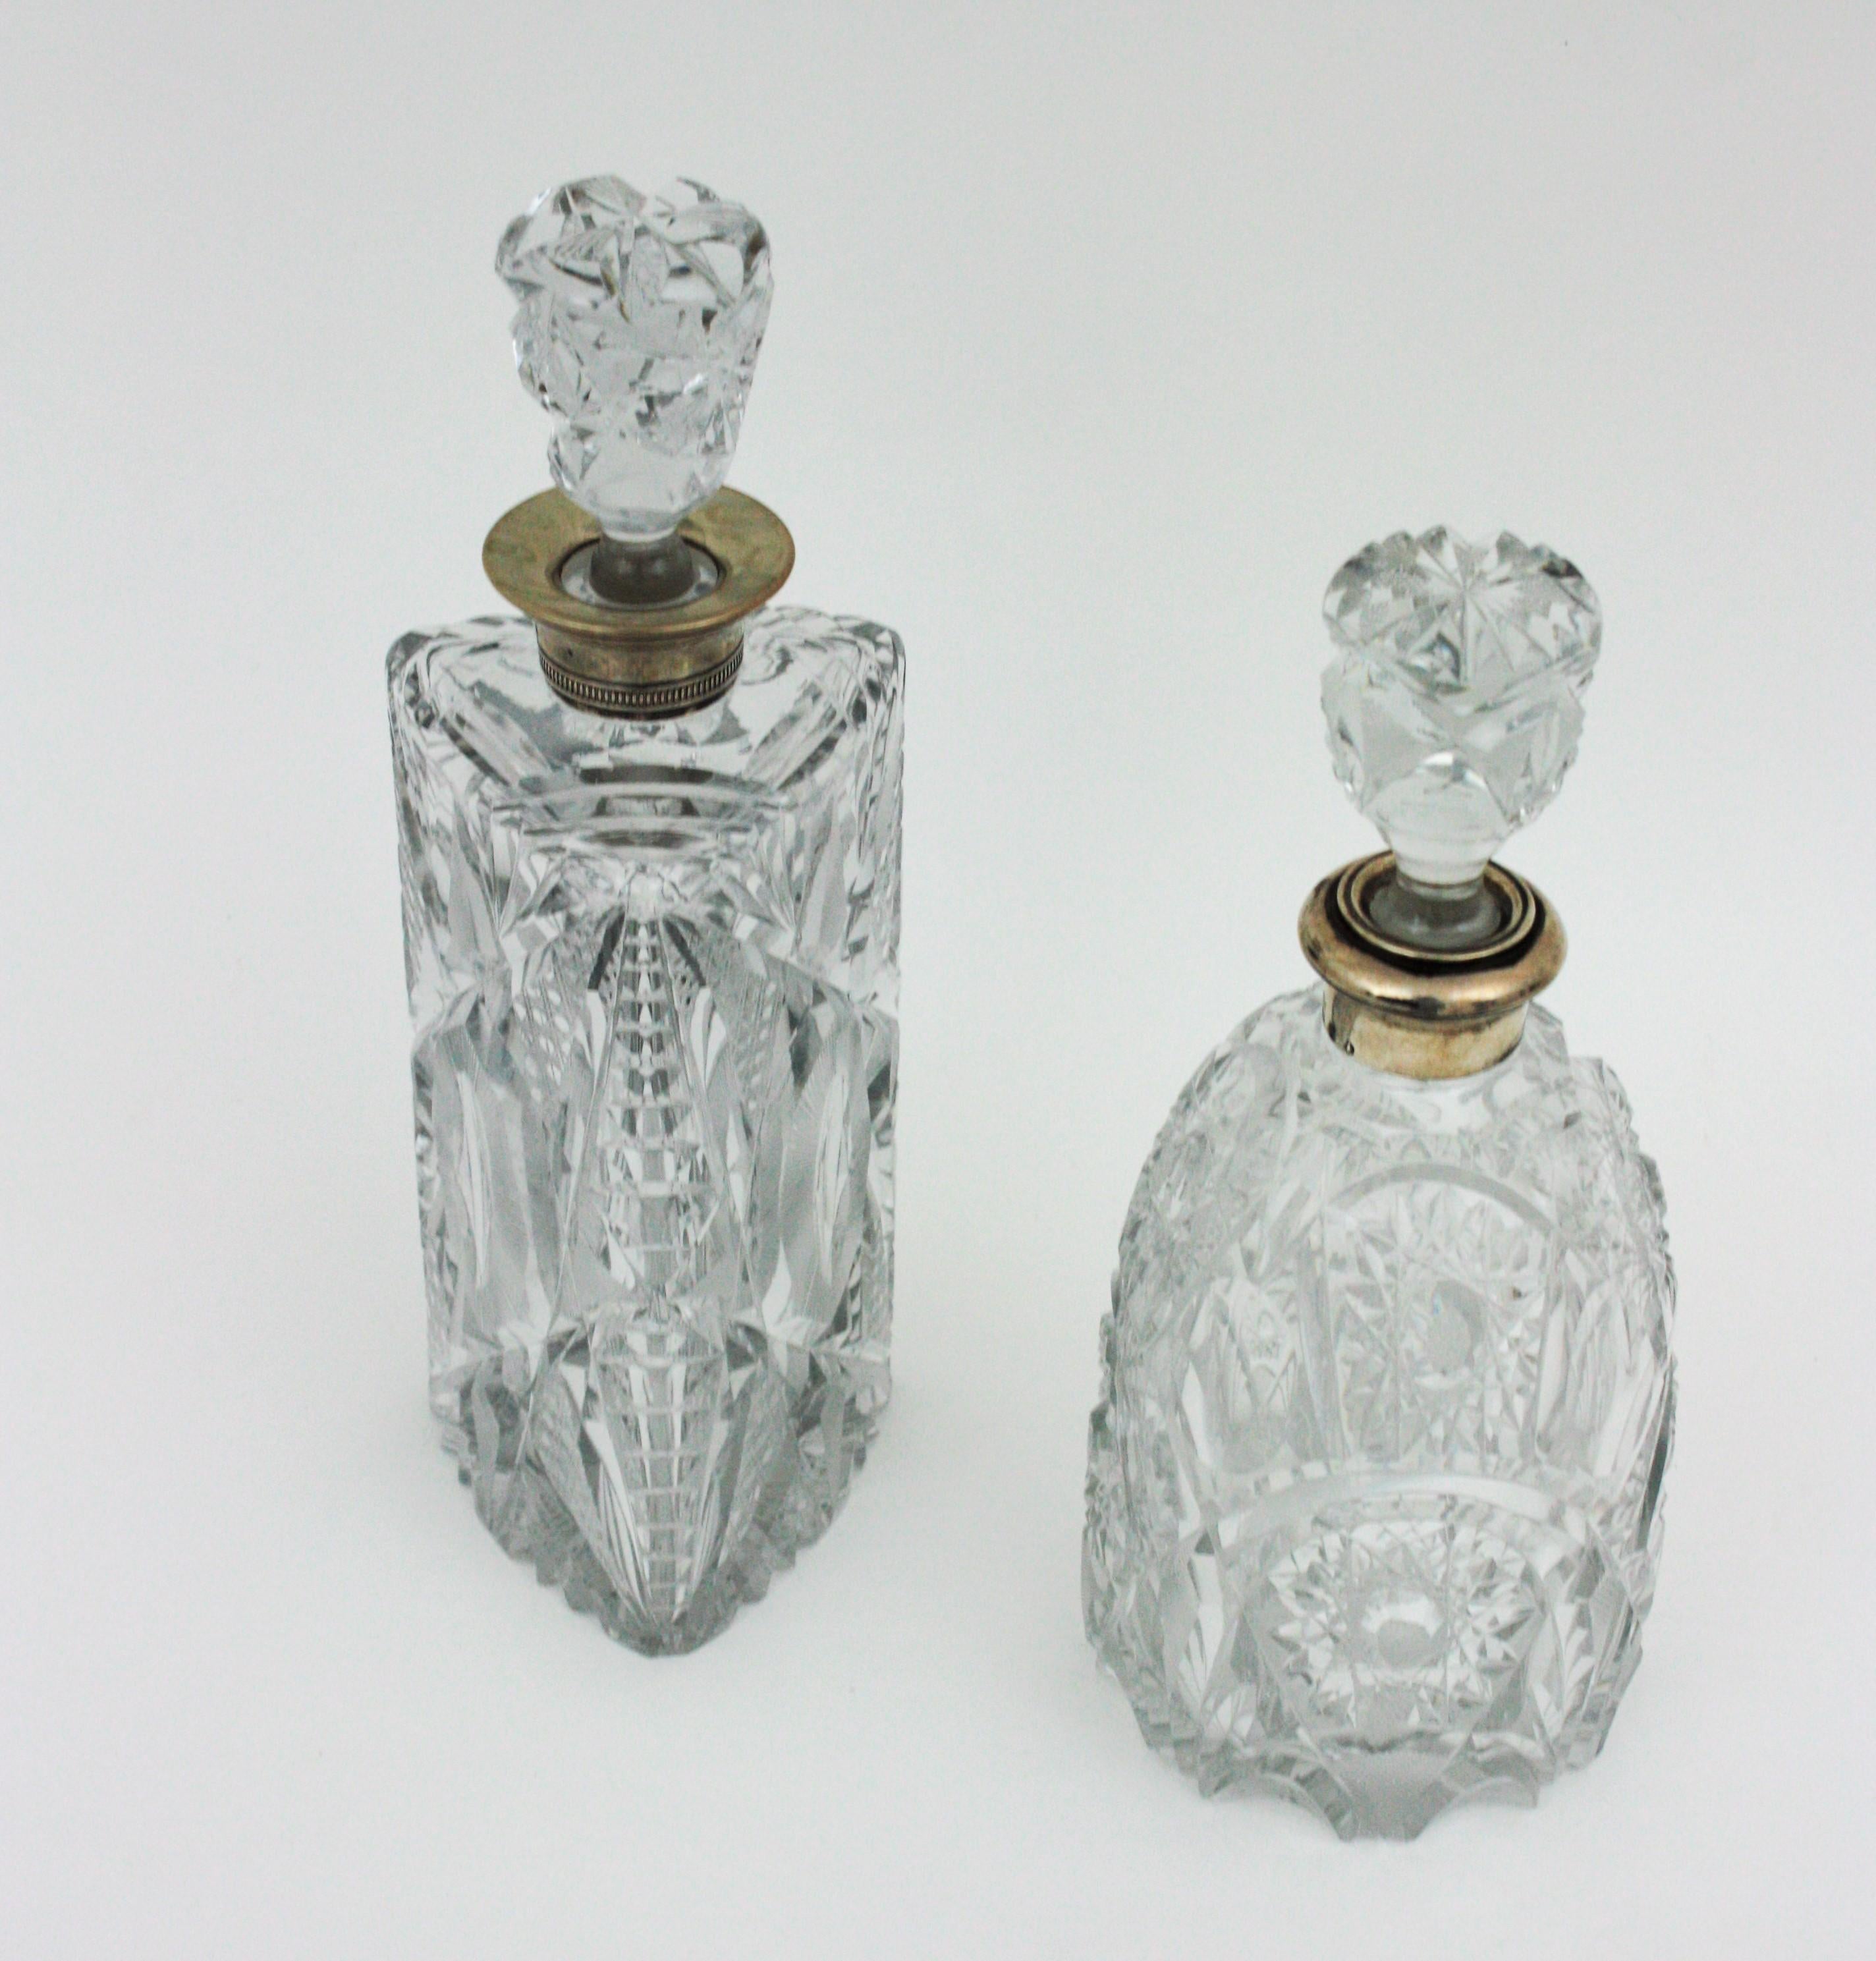 Unmatching pair of Art Deco cut crystal and silver decanters/ liqueur bottles with stoppers. Spain, 1930s
One has triangular shape and the other one bell shape.
These spirit decanters are finely executed with very detailed cut cristal patterns